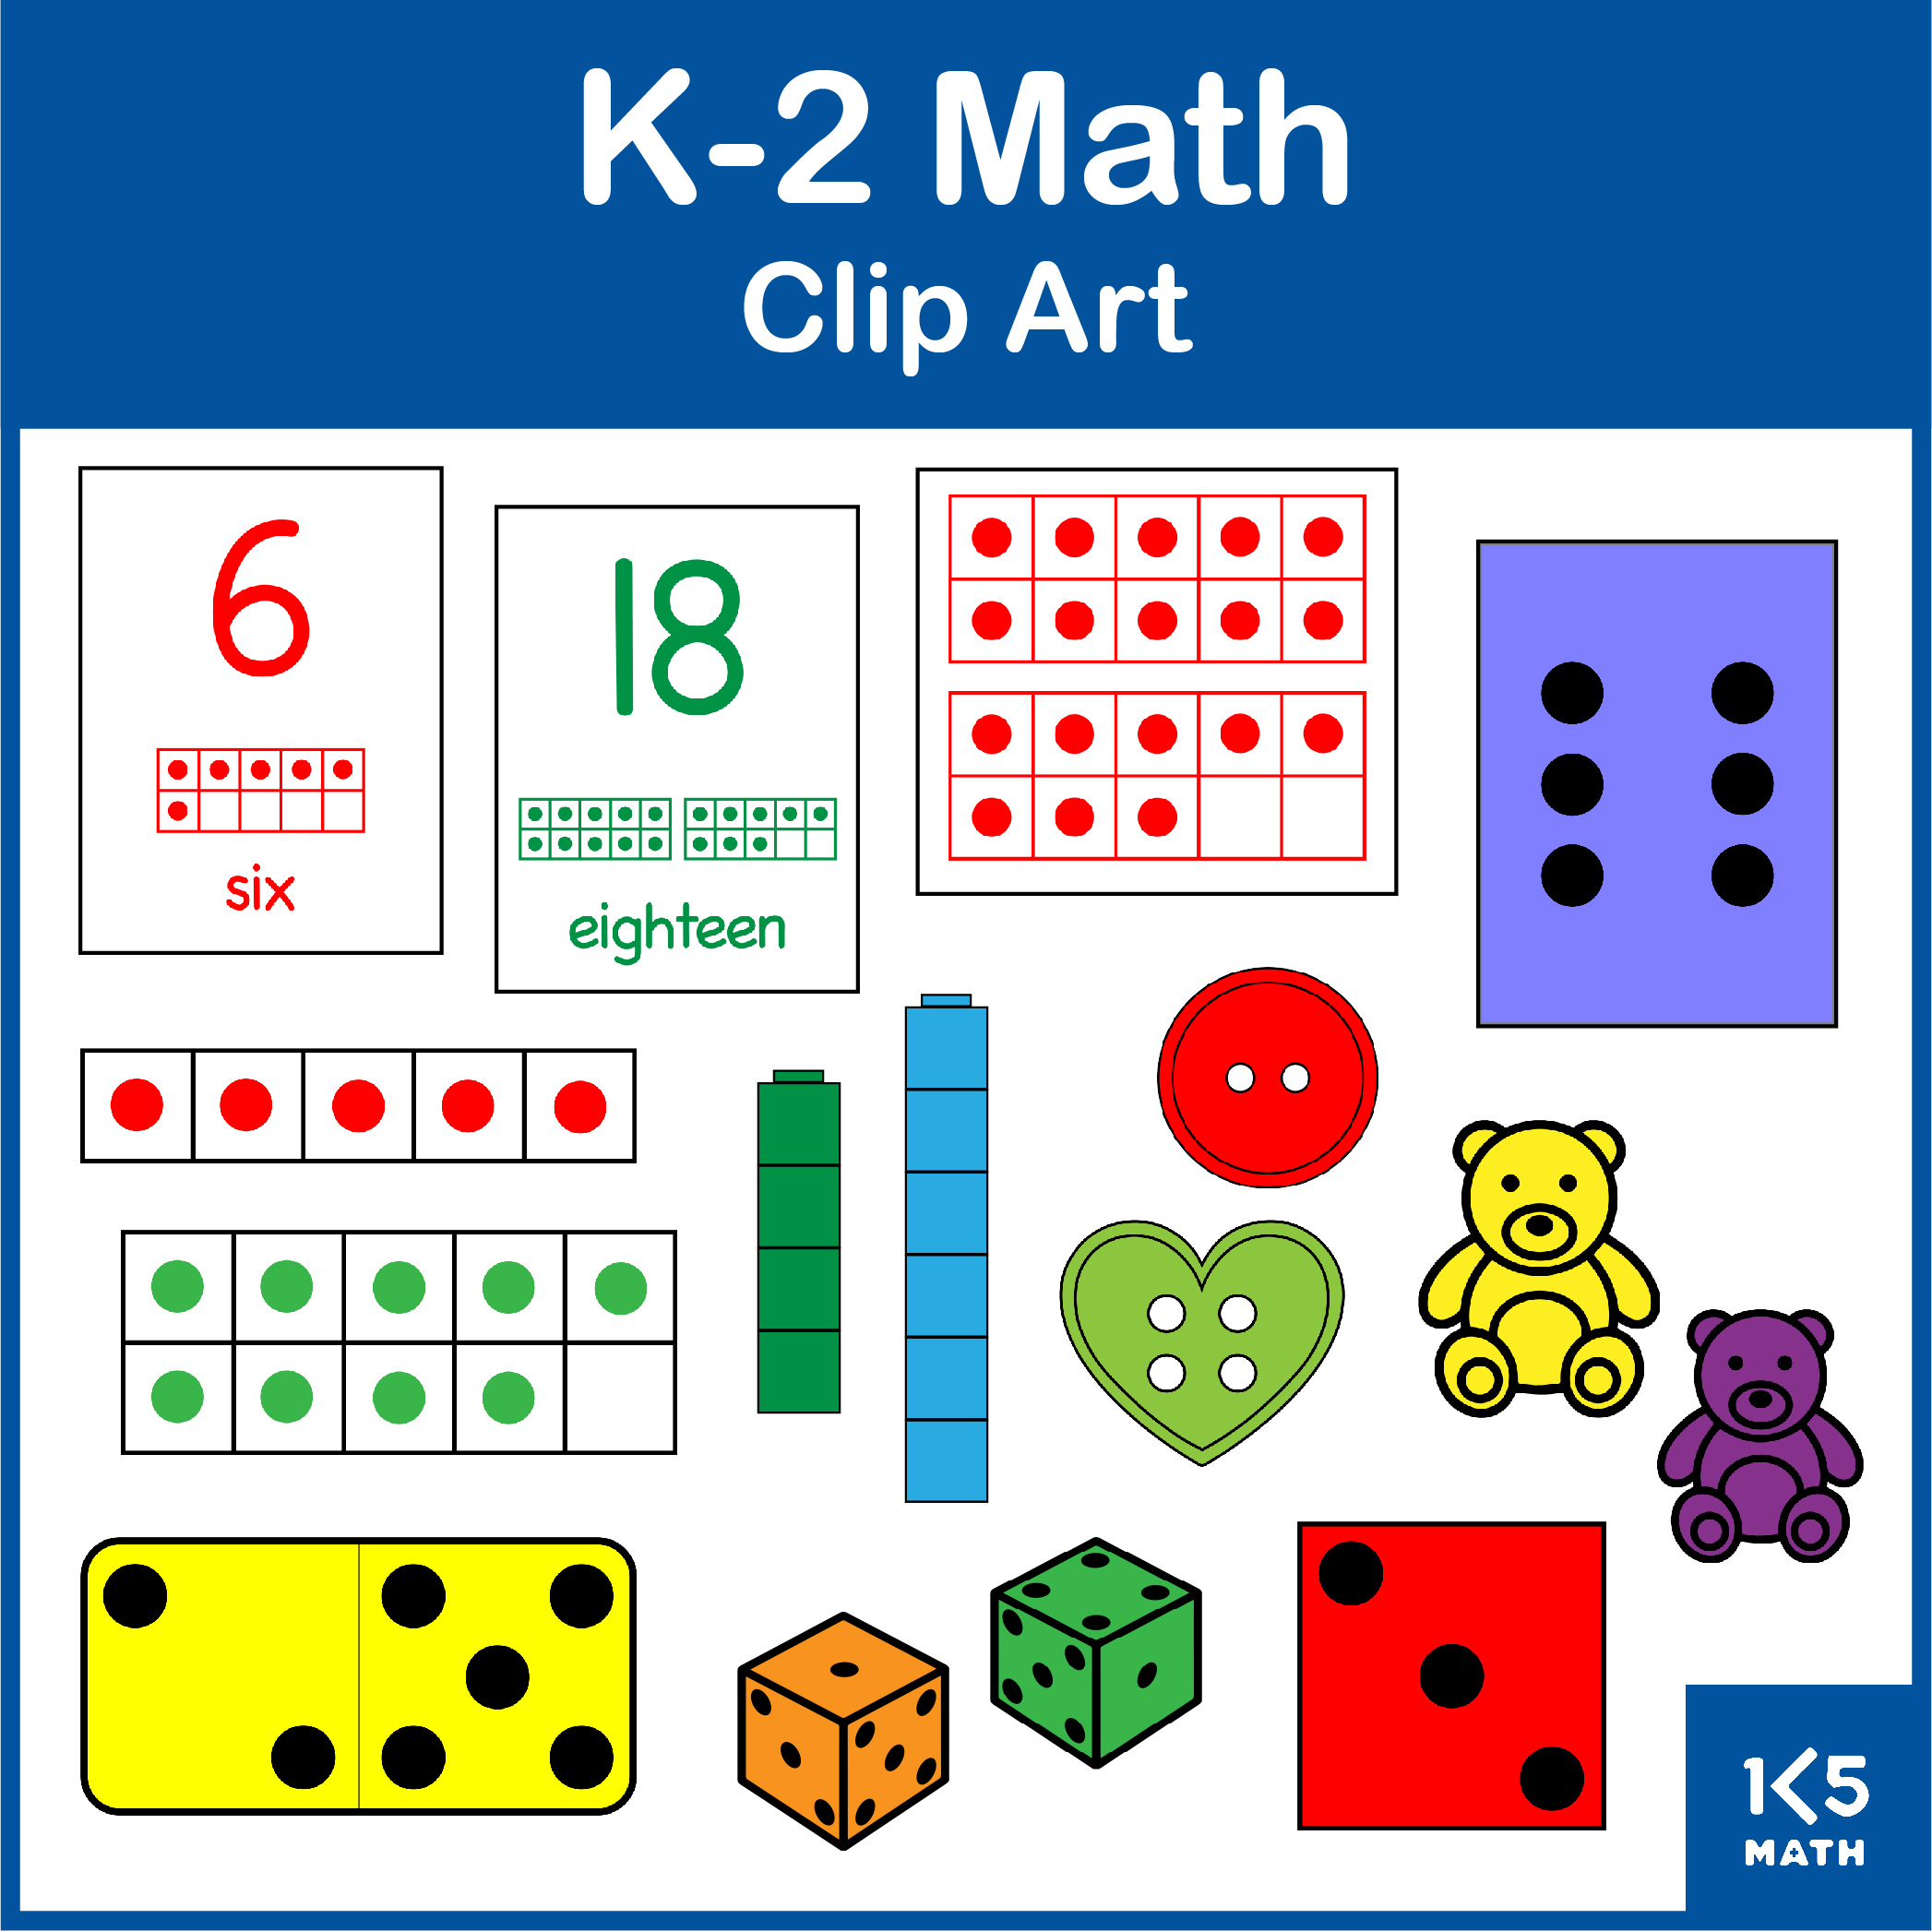 Hundreds of Math Clip Art images for your K-2 educational resources.